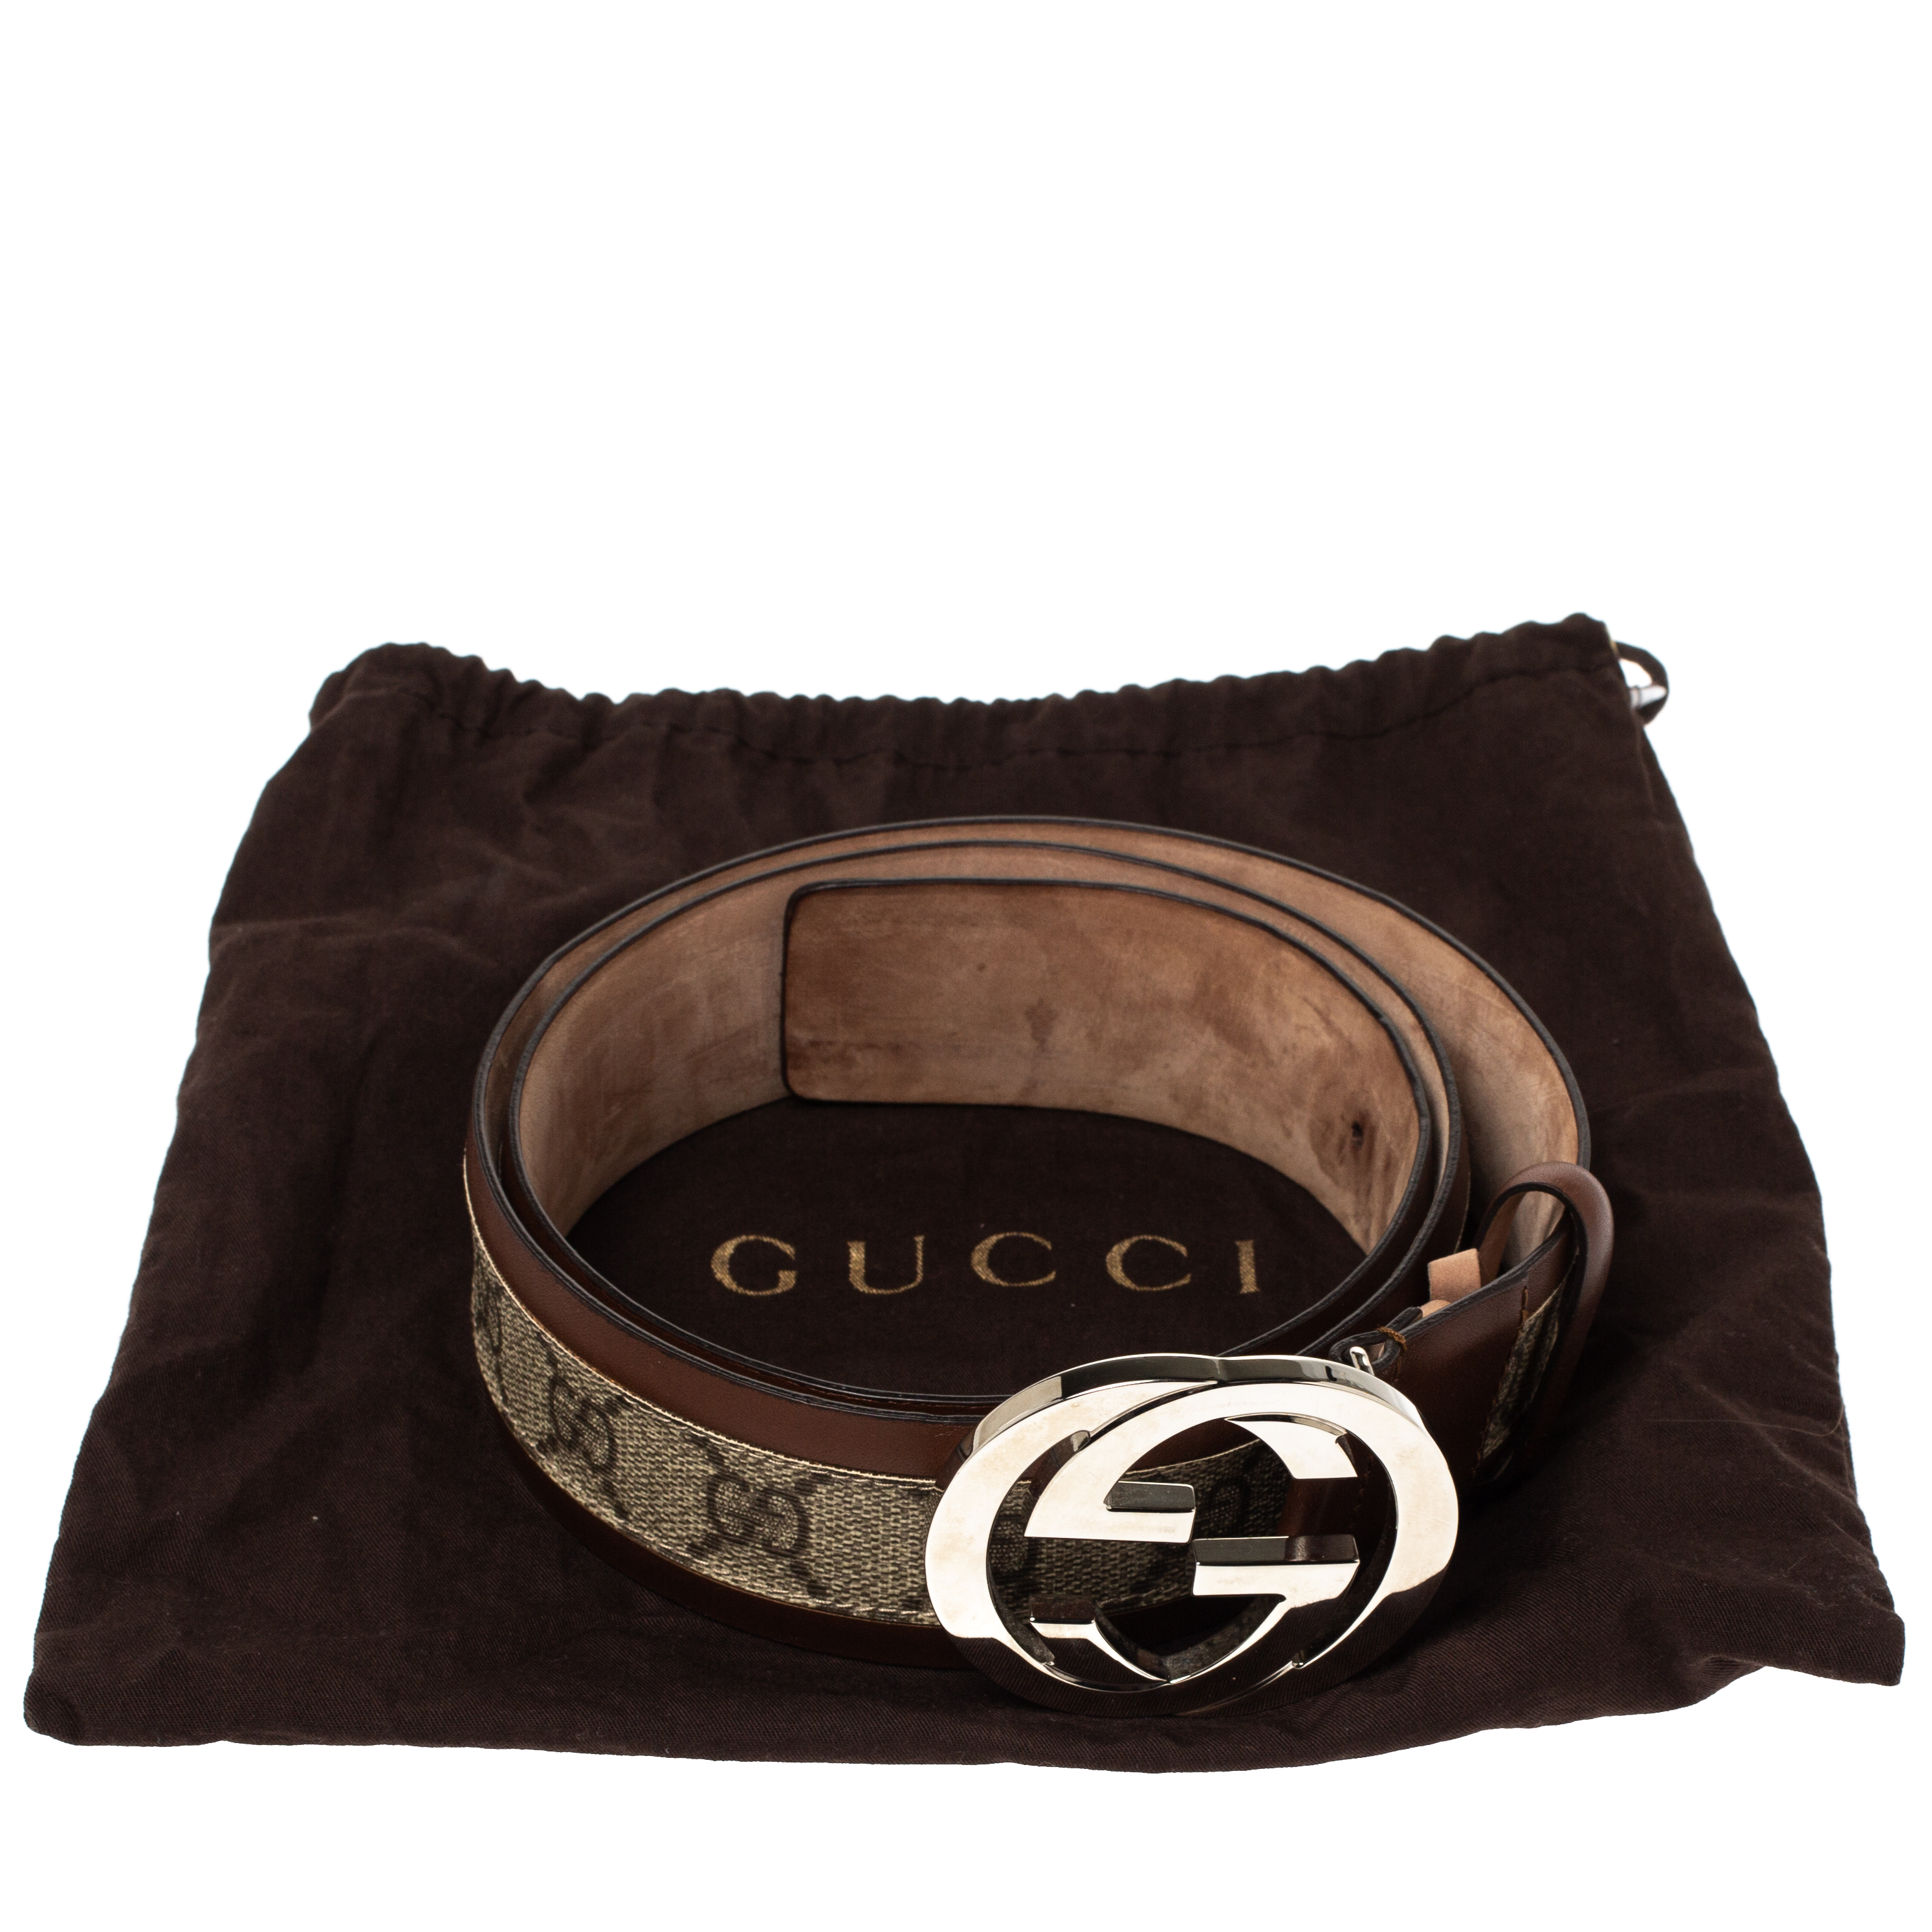 Authenticated Used Gucci belt beige brown silver interlocking 114876 40mm  canvas leather GUCCI waist long GG men 